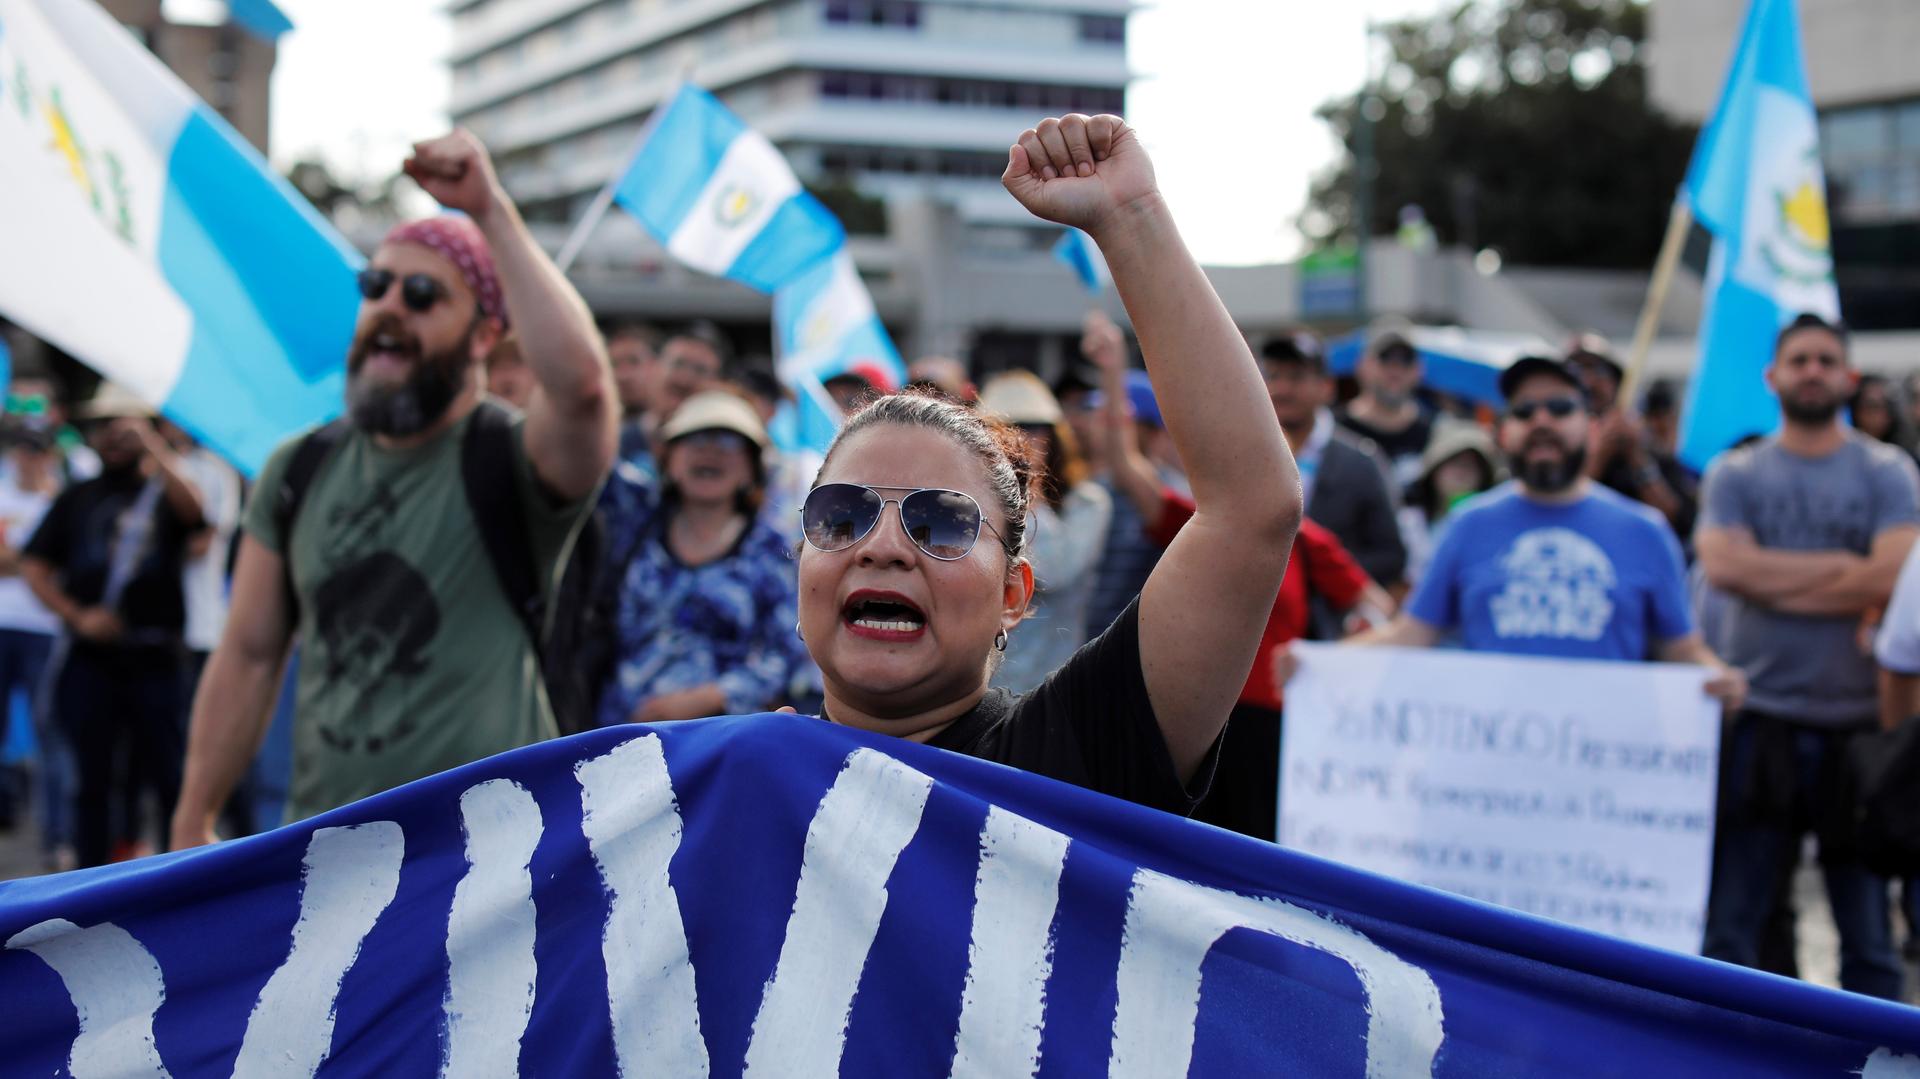 A female protester raises her fist as she takes part in a march to protest against the decision of Guatemala President Jimmy Morales to end the mandate of the UN-backed anti-graft commission, the CICIG, in Guatemala City, Guatemala, January 12, 2019.